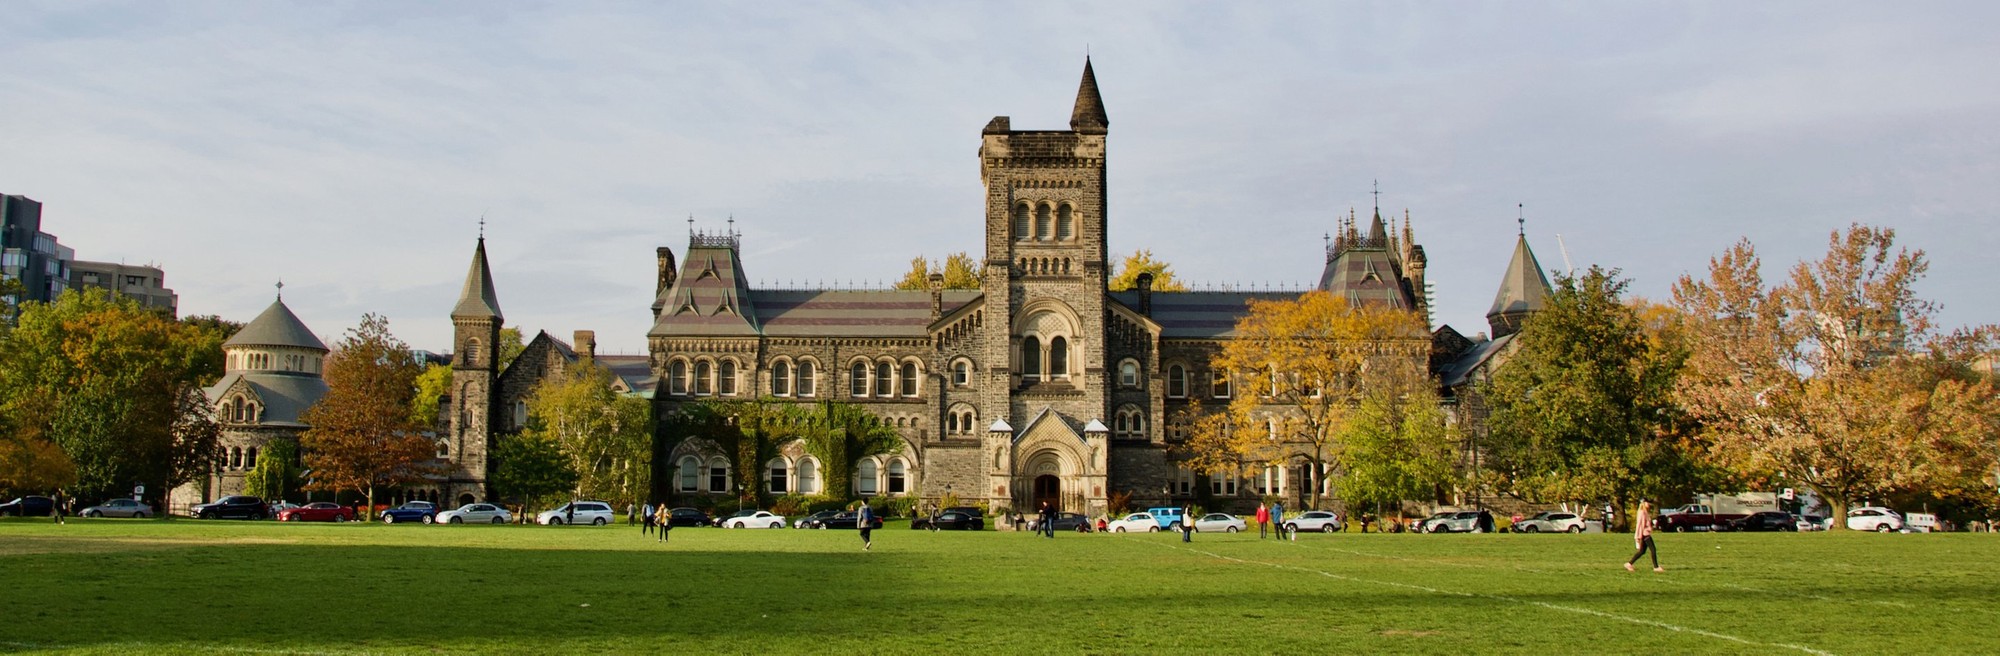 Front view of the University of Toronto